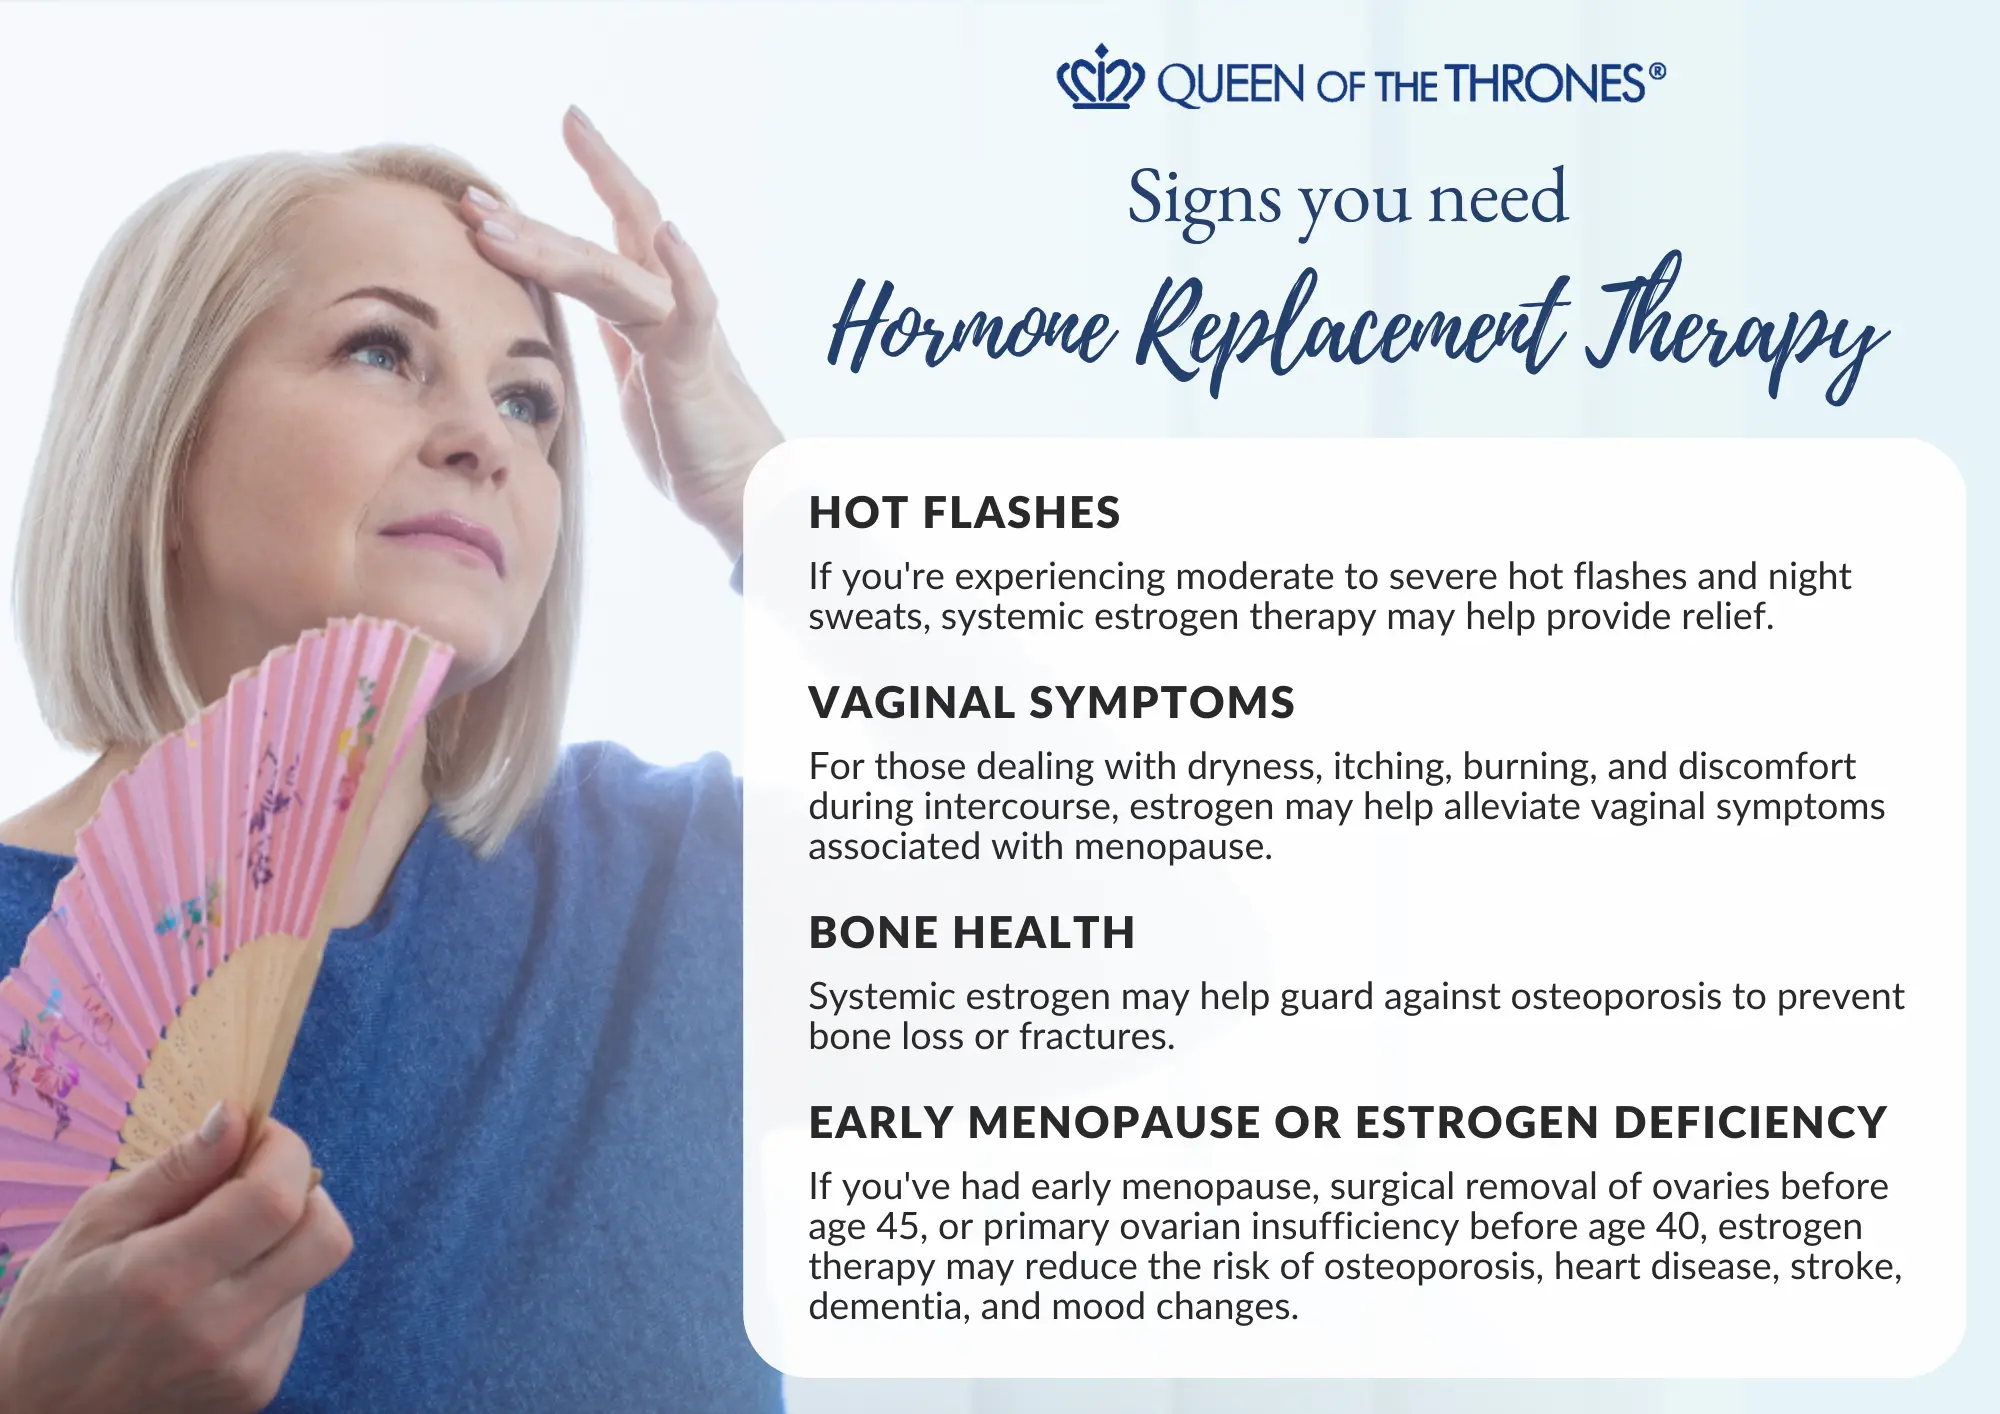 Signs you need hormone replacement therapy by Queen of the Thrones